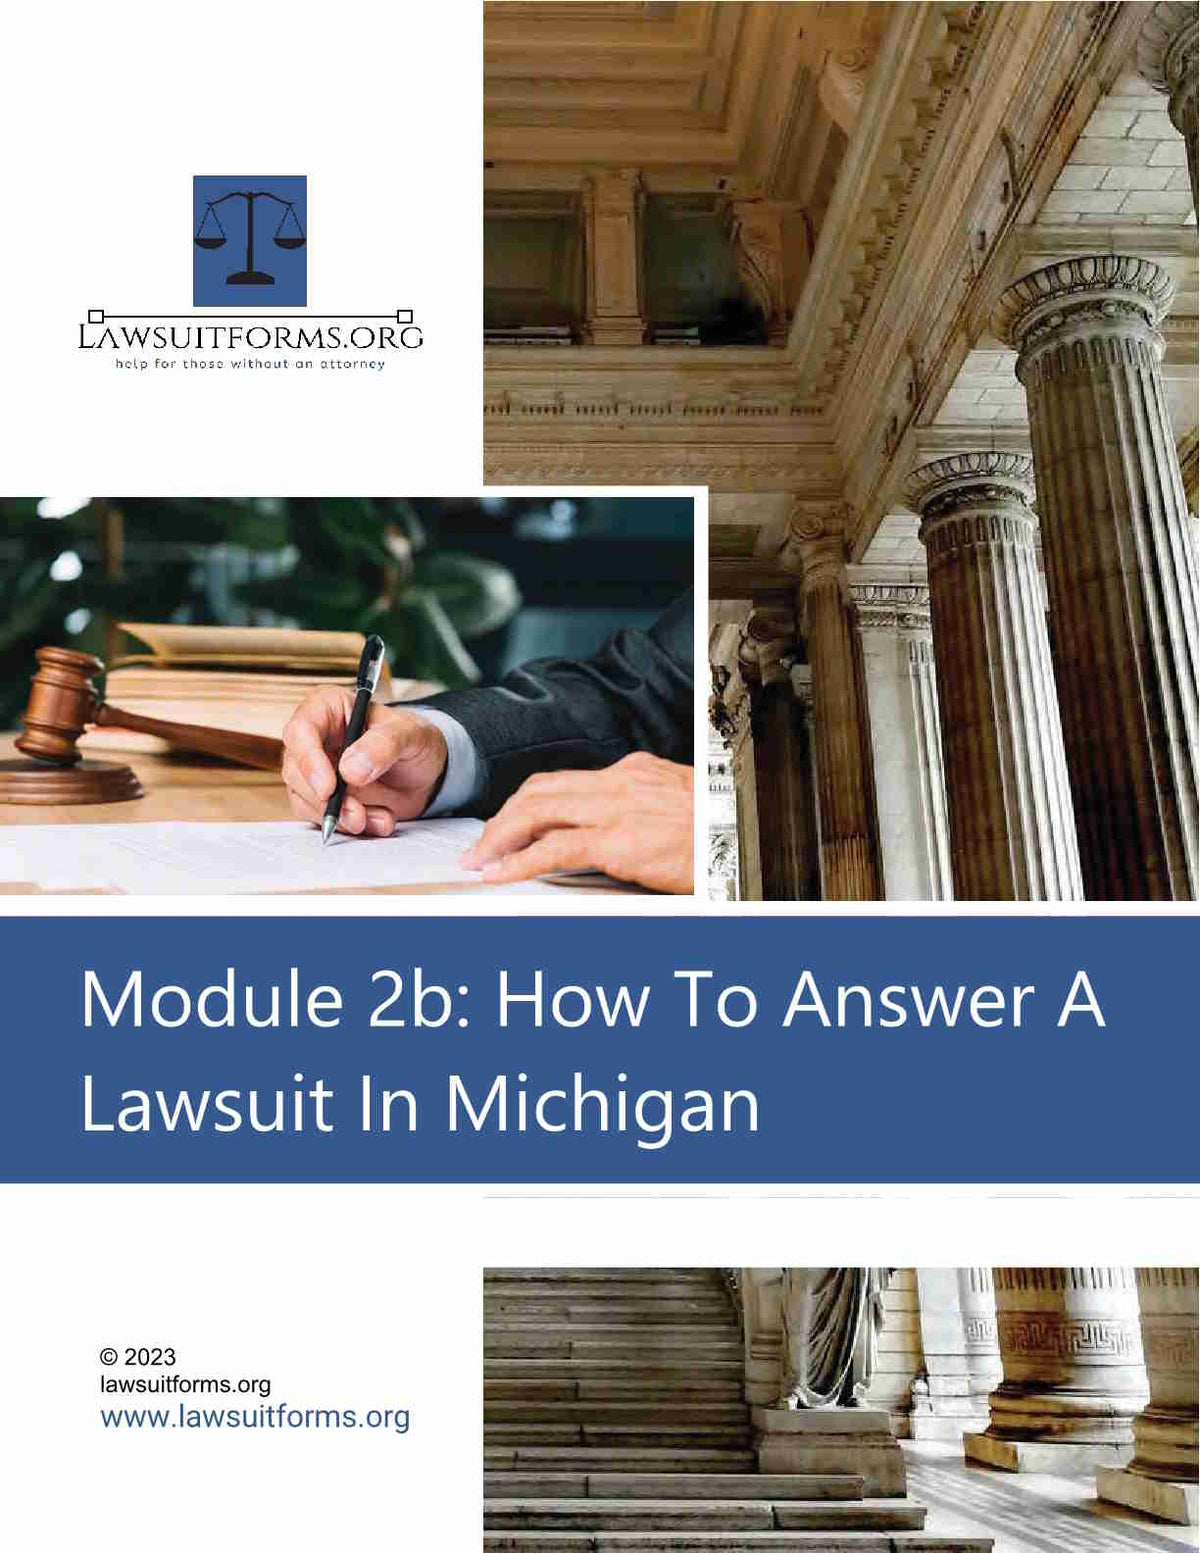 How to answer a lawsuit in Michigan